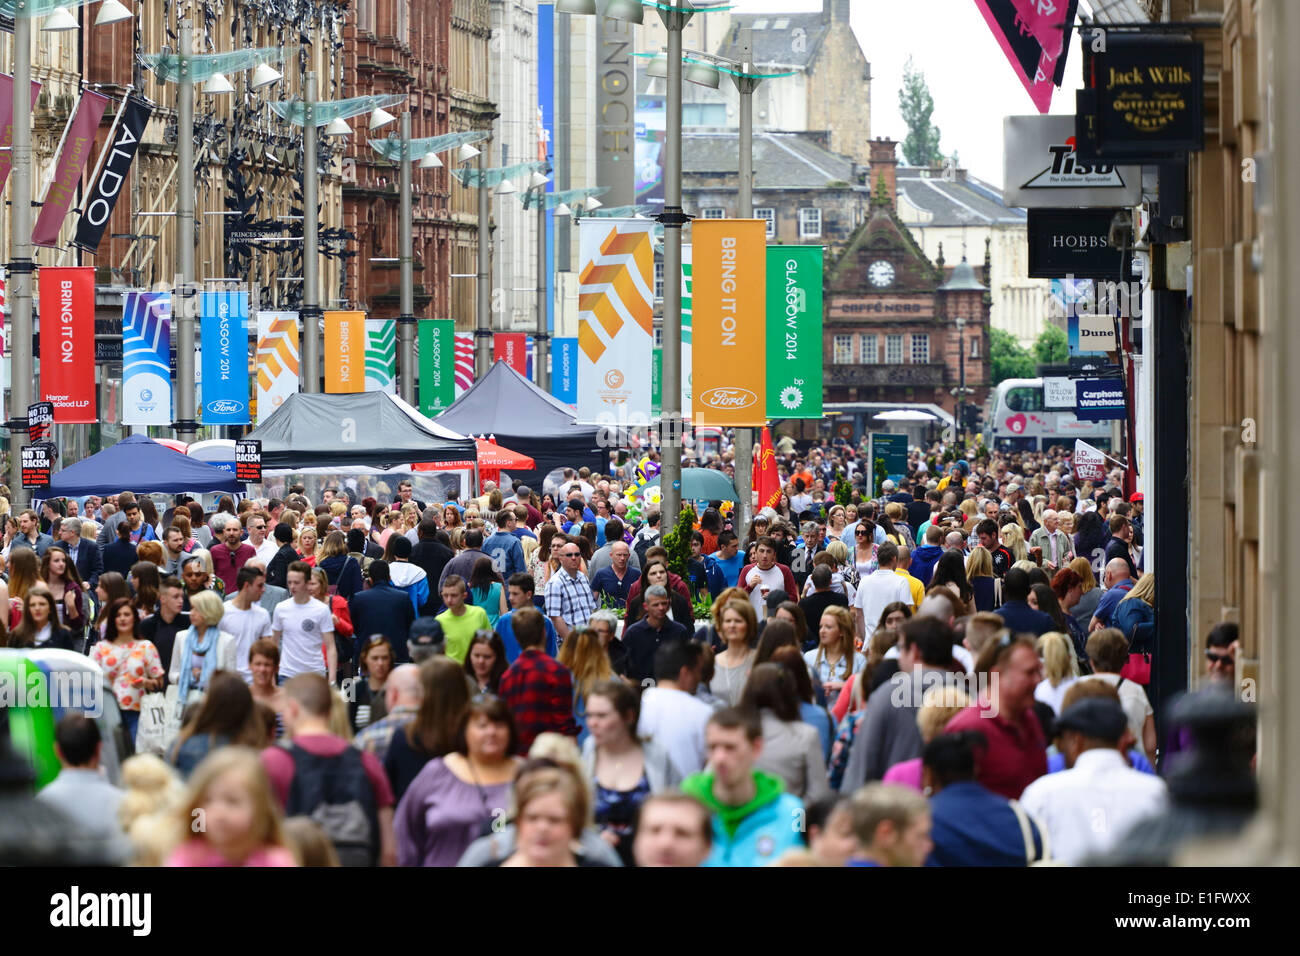 A busy Buchanan Street in Glasgow city centre with colourful banners to welcome visitors ahead of the Glasgow 2014 Commonwealth Games, Scotland, UK Stock Photo